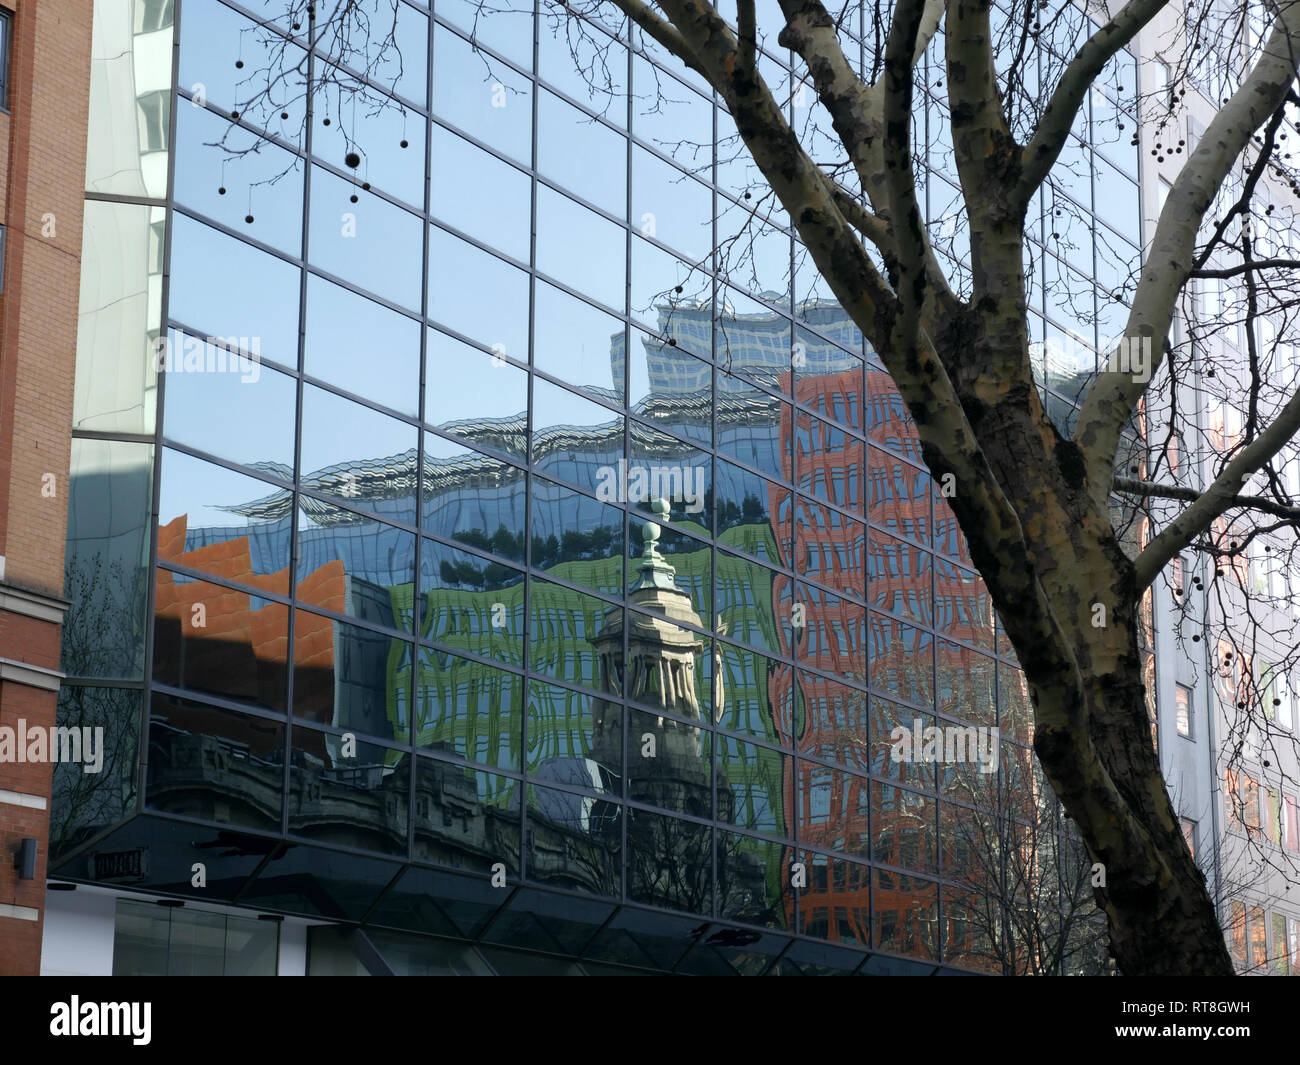 Reflections of the bell tower of the Shaftsbury Theatre and surrounding buildings. Stock Photo